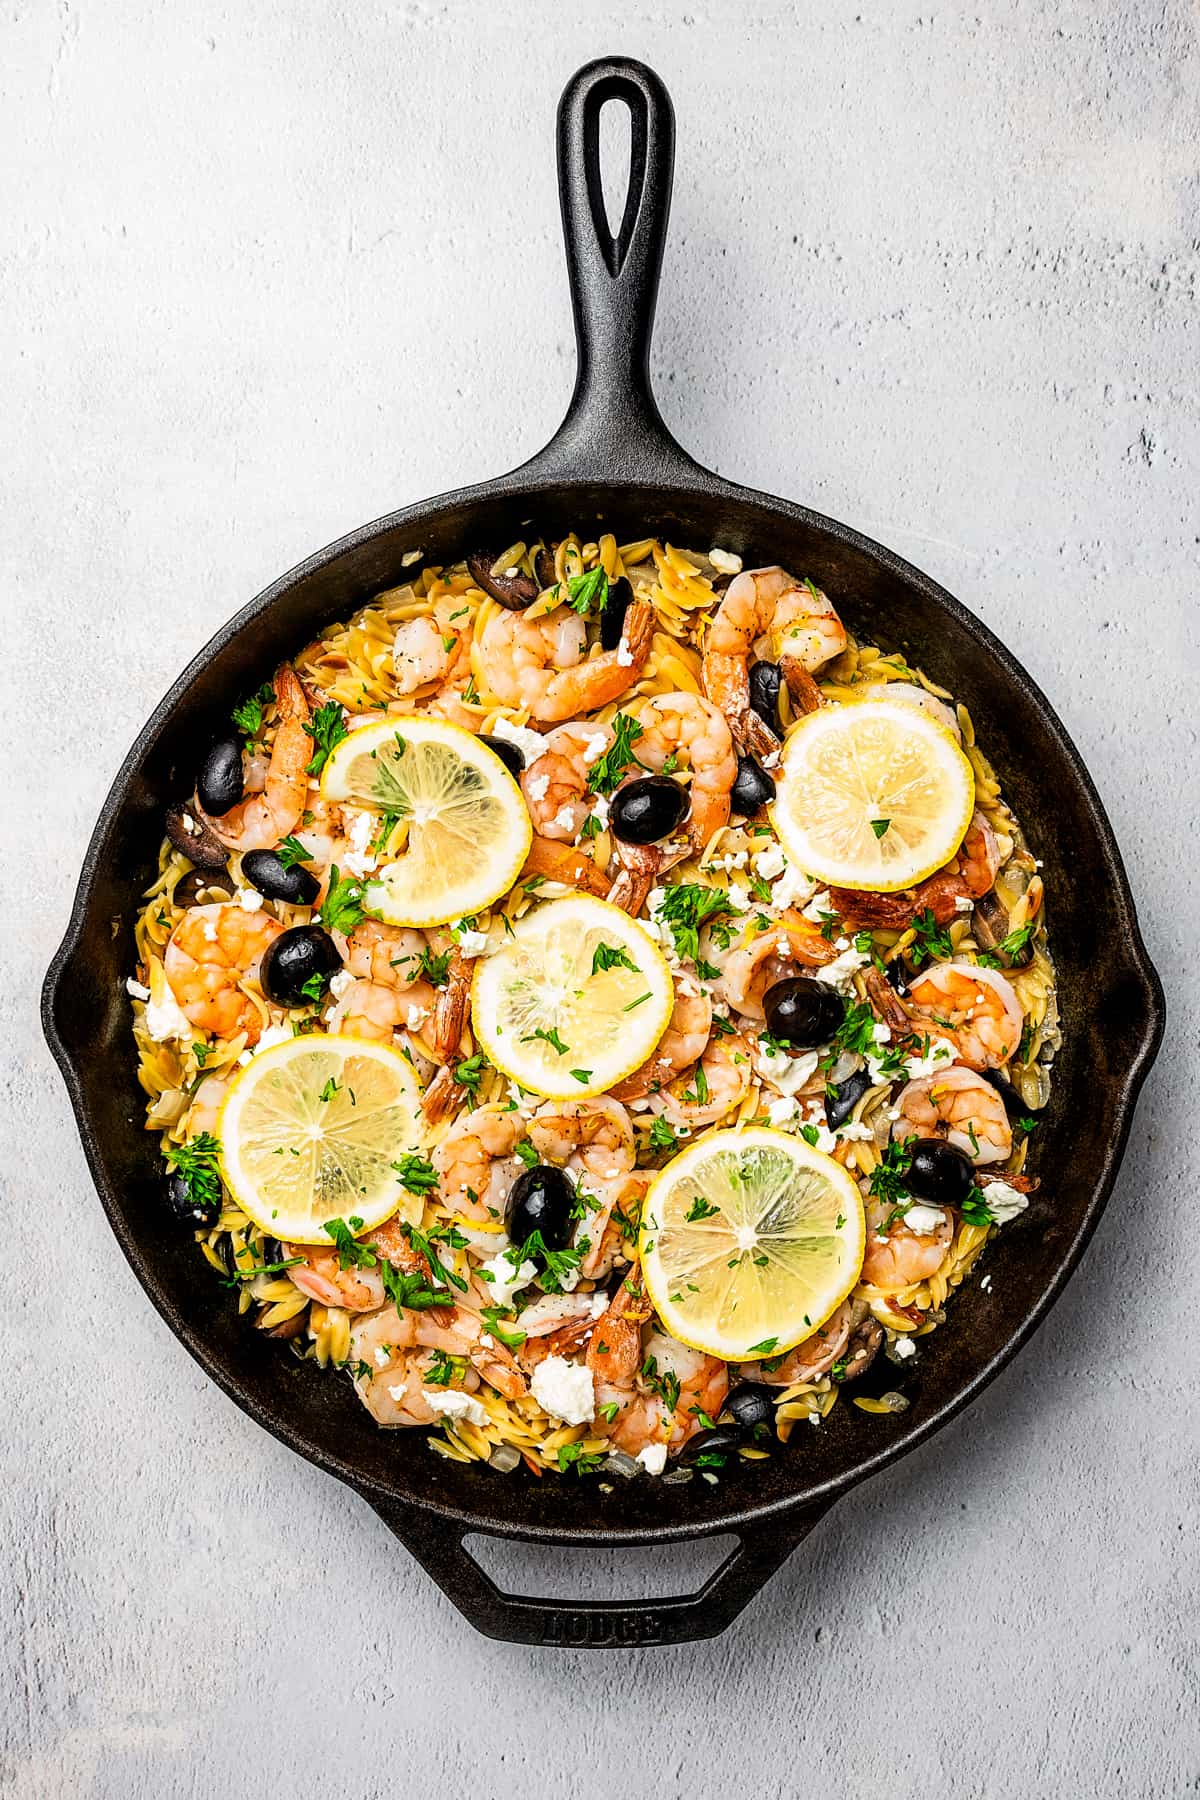 Orzo with shrimp, lemon, olives, and other ingredients.